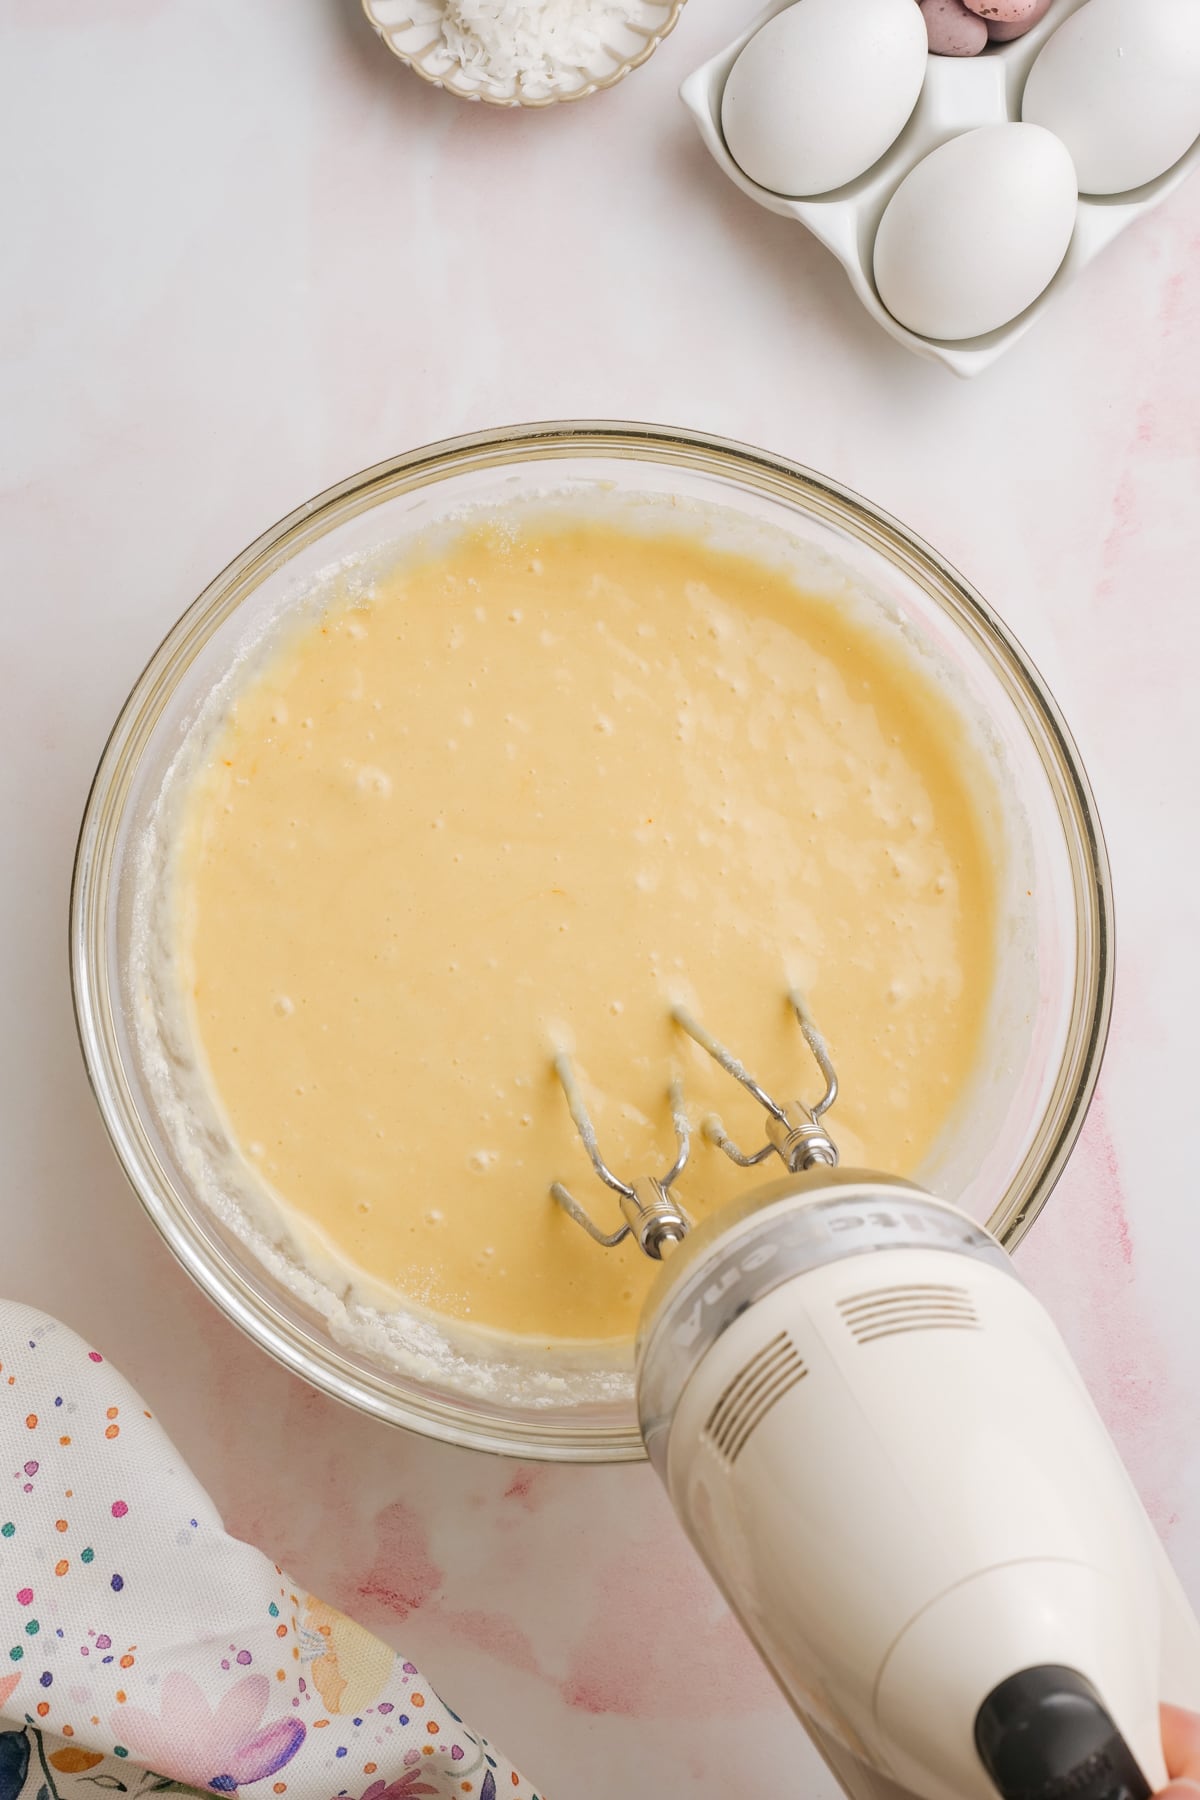 Mix the cake batter with a hand mixer